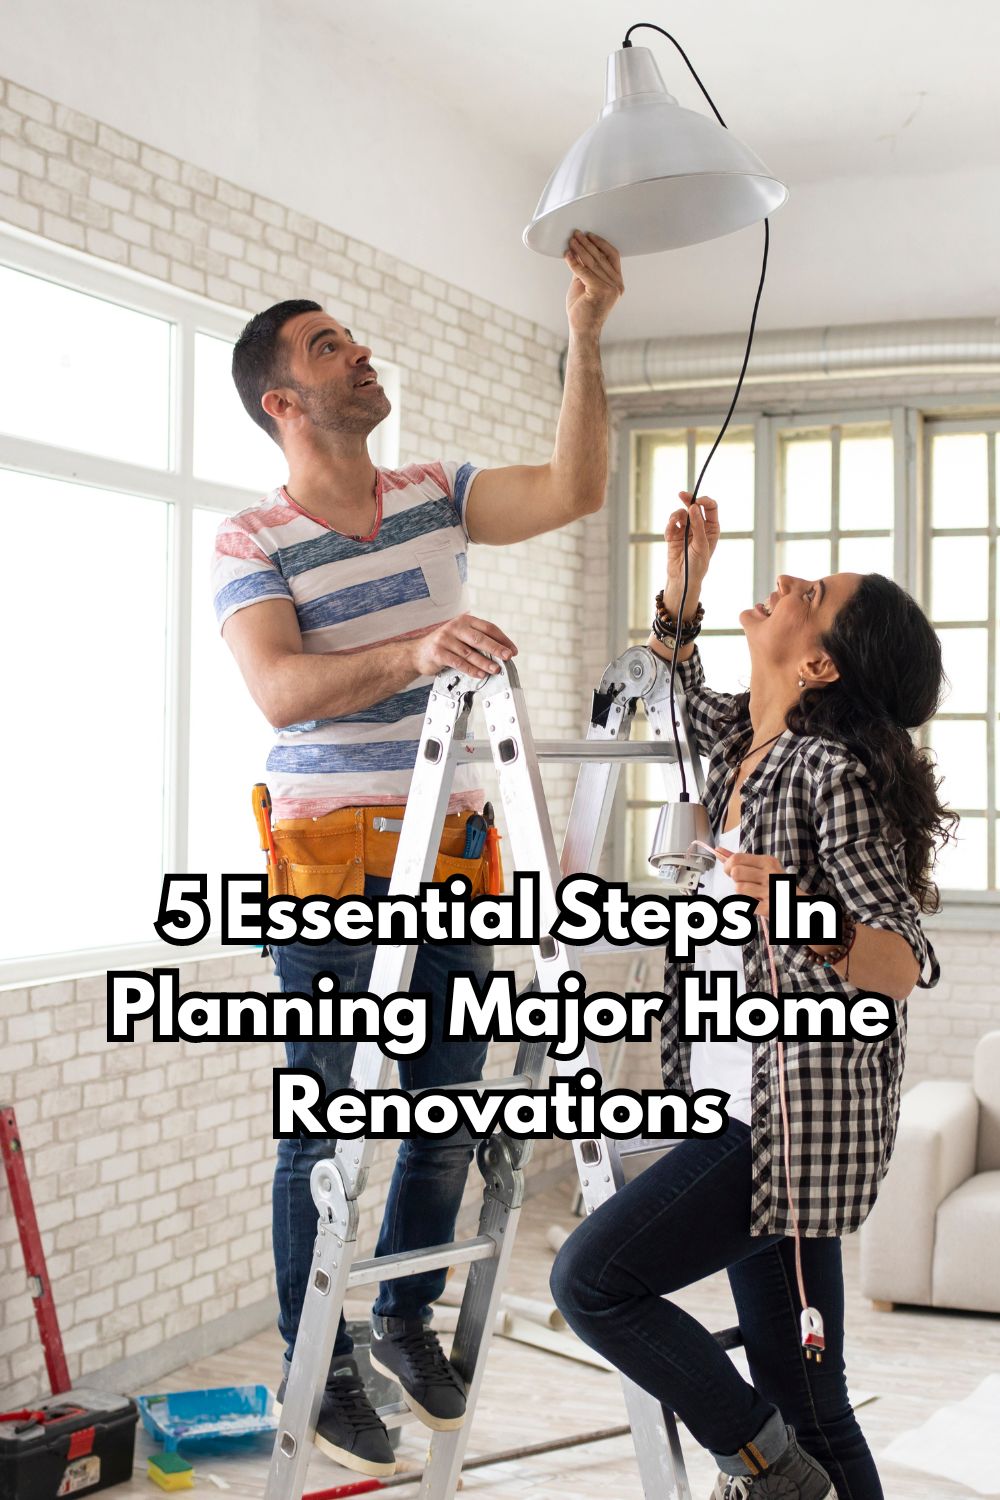 5 Essential Steps In Planning Major Home Renovations